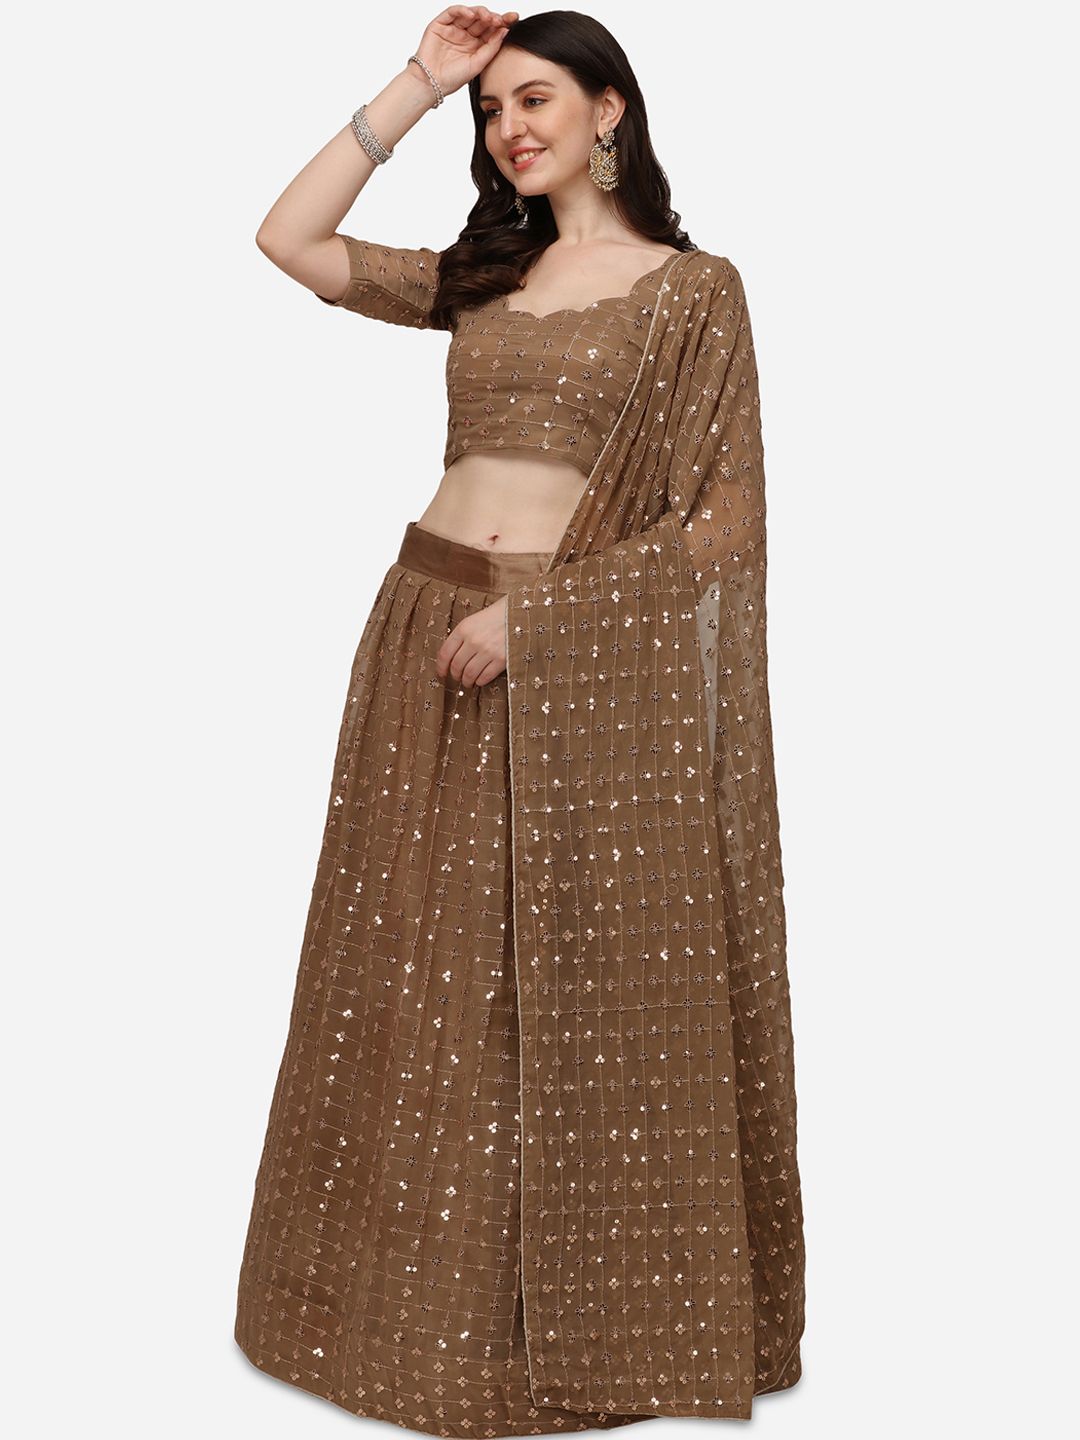 Pratham Blue Beige Embellished Sequinned Semi-Stitched Lehenga & Unstitched Blouse With Dupatta Price in India